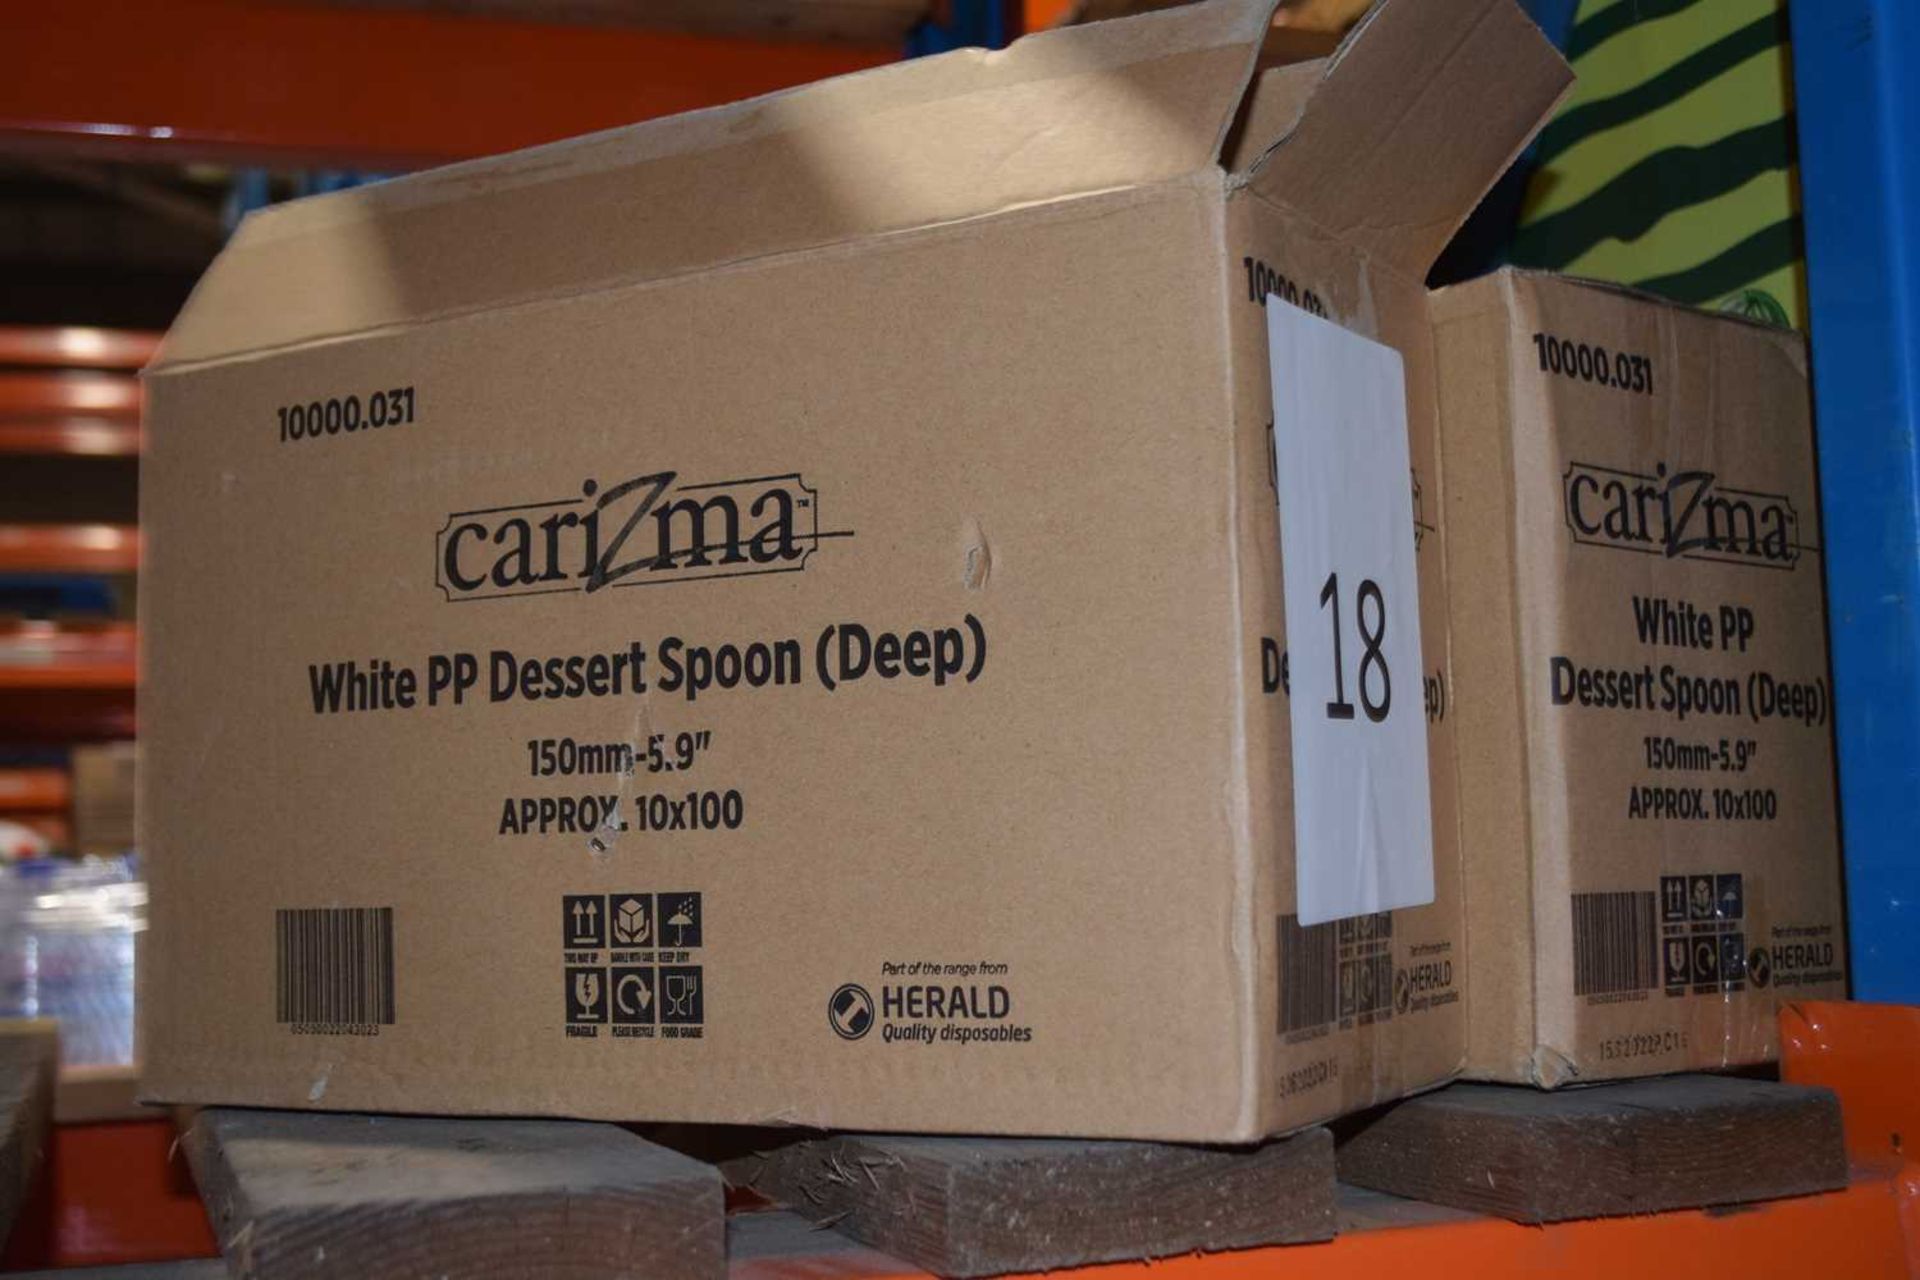 Two boxes of Carizma White PP Dessert Spoons (Deep), 150mm, approx 10,000 per box